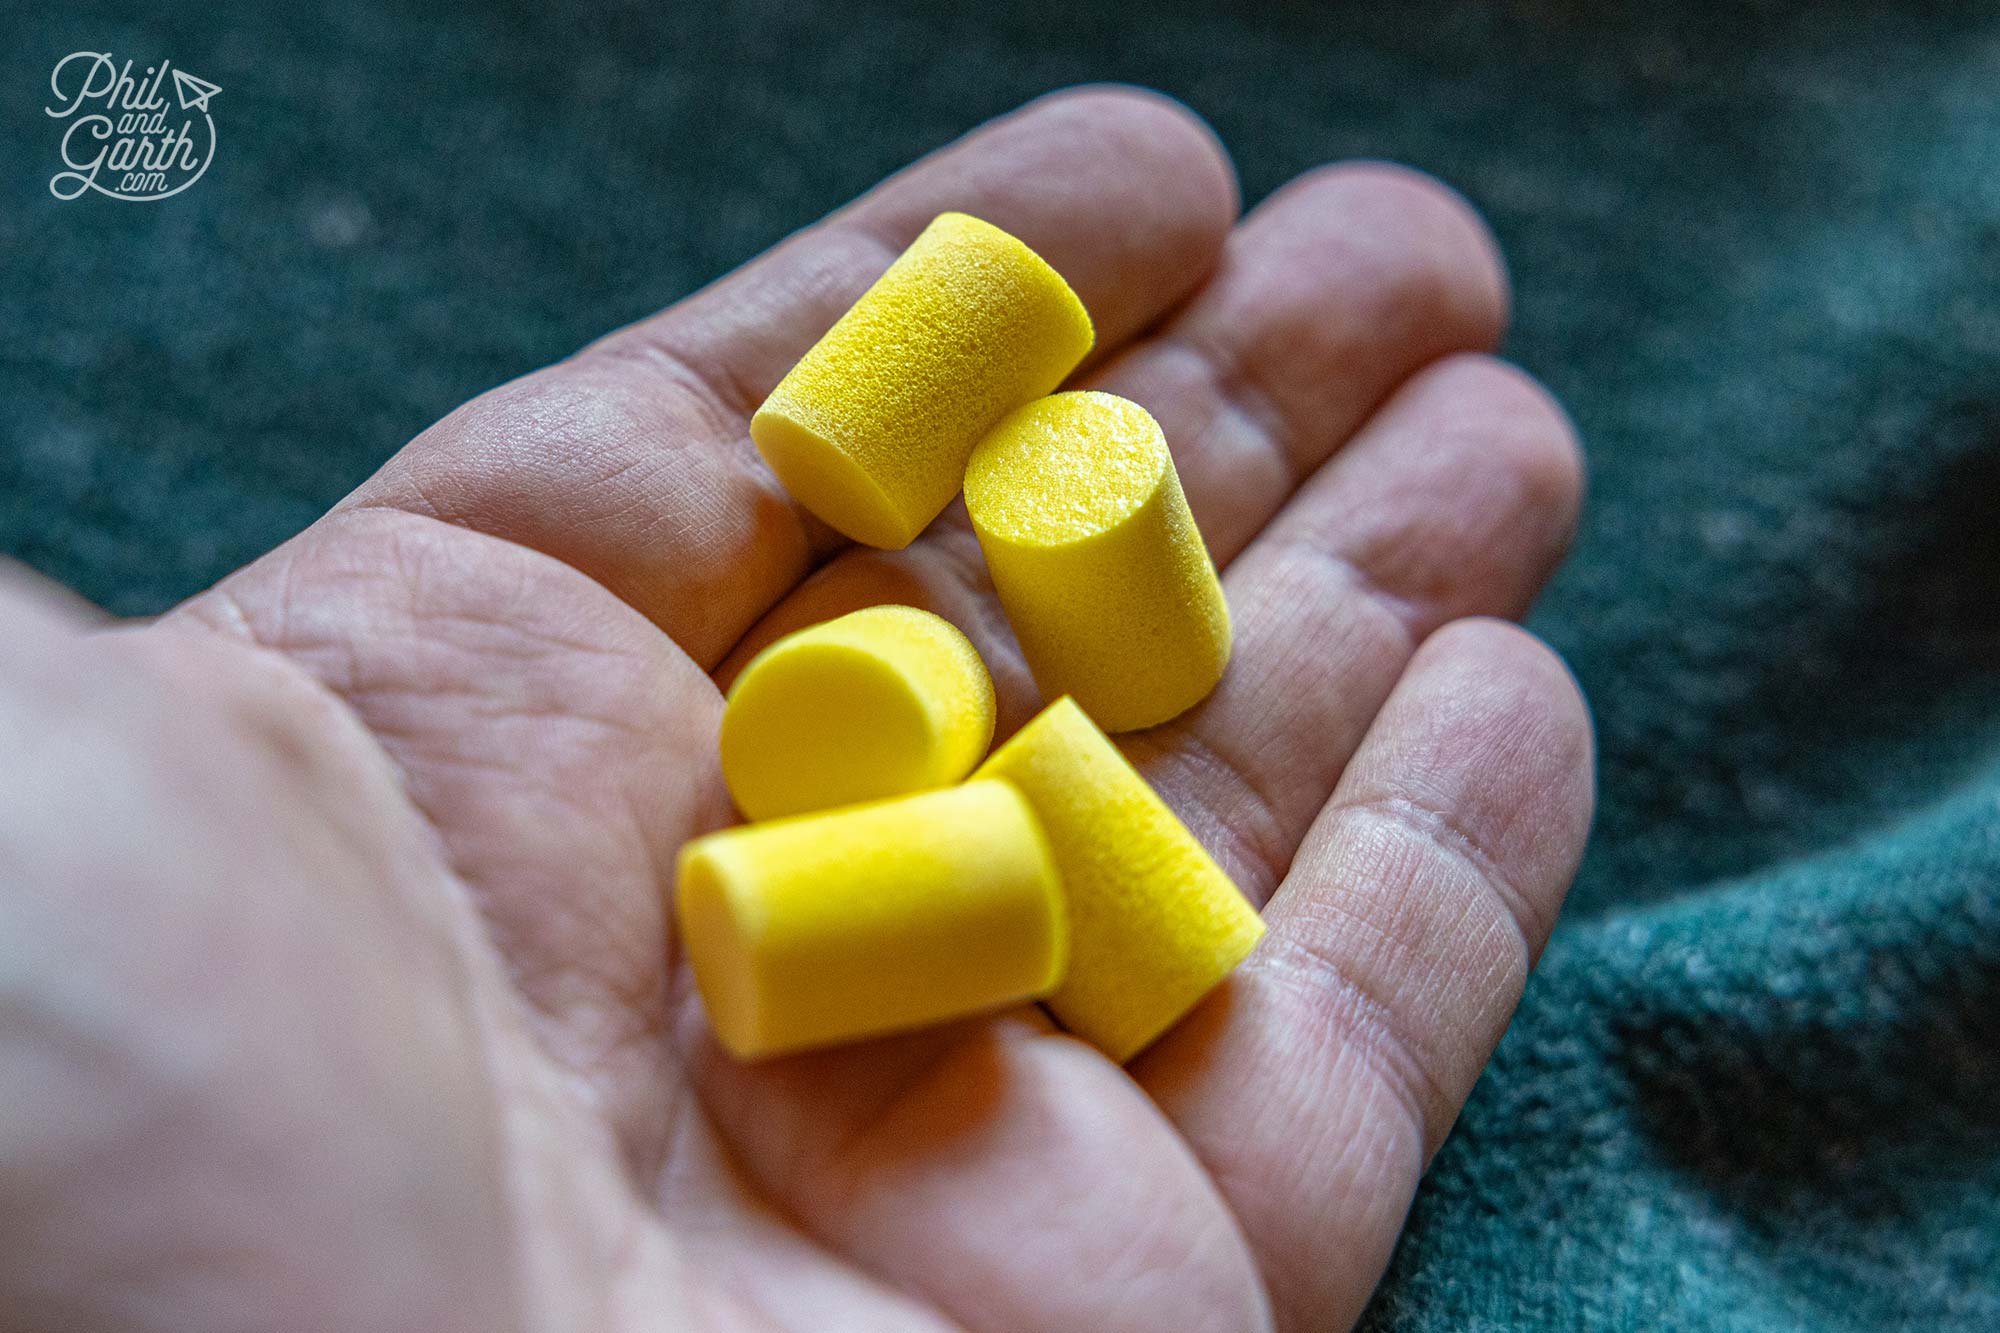 Buy these kind of thick ear plugs for a good night sleep